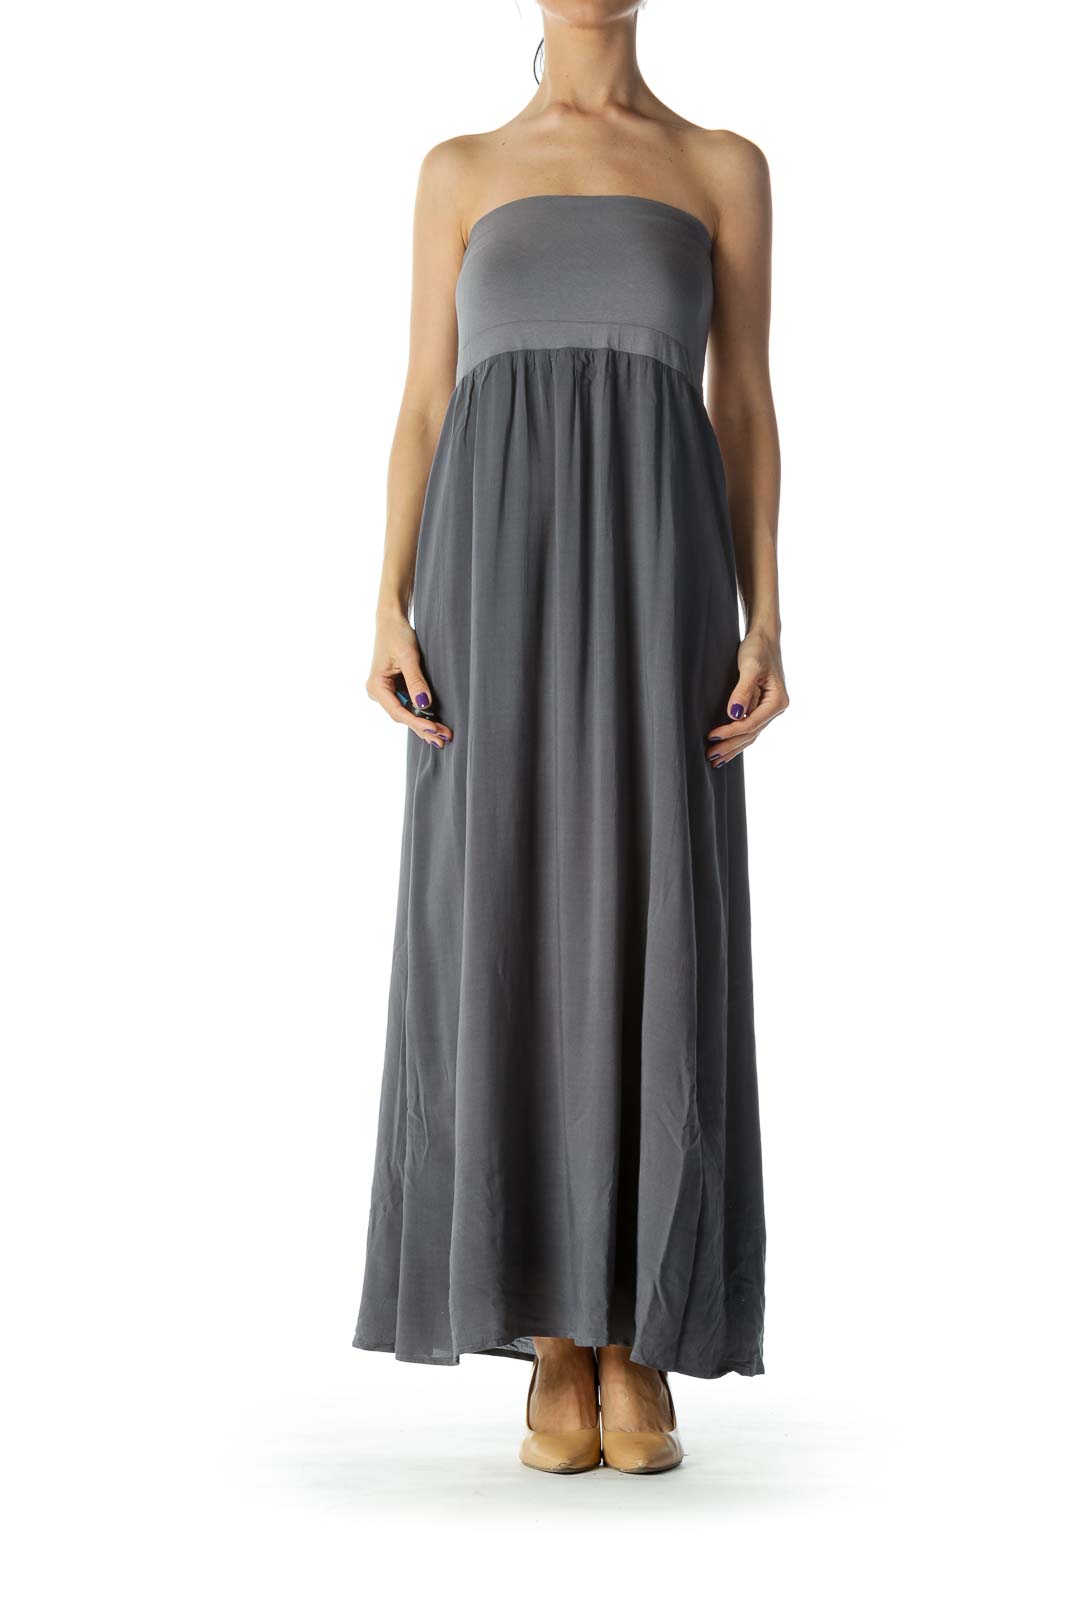 Grey Strapless Maxi Dress Front